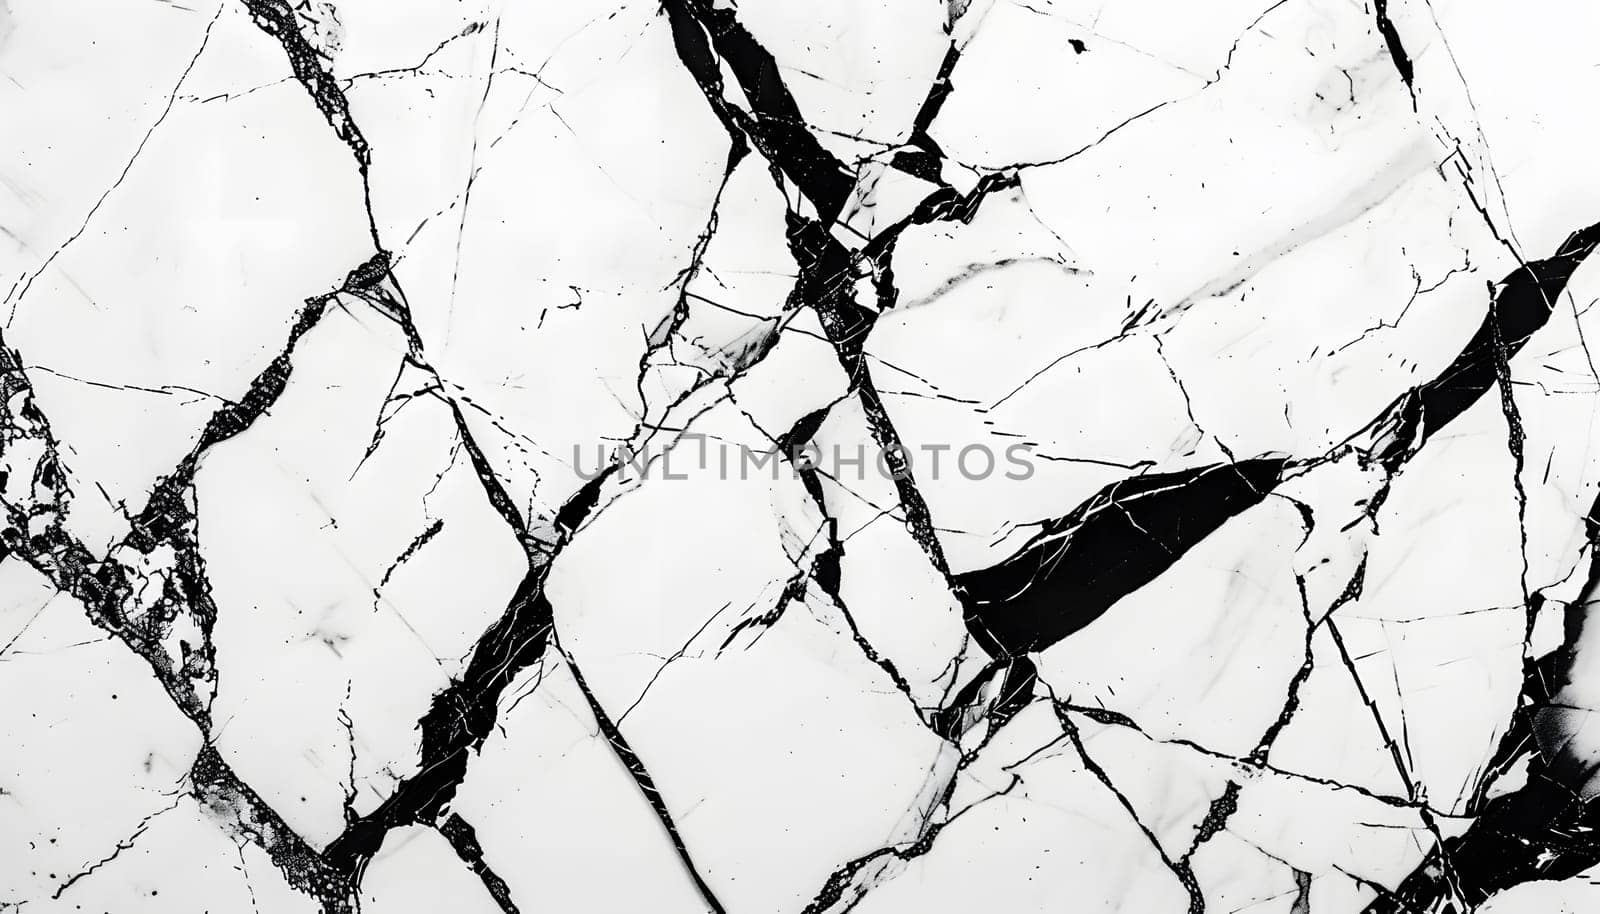 A monochrome photo capturing the intricate texture of a marble surface, resembling a unique pattern found in nature like on a tree bark or twig